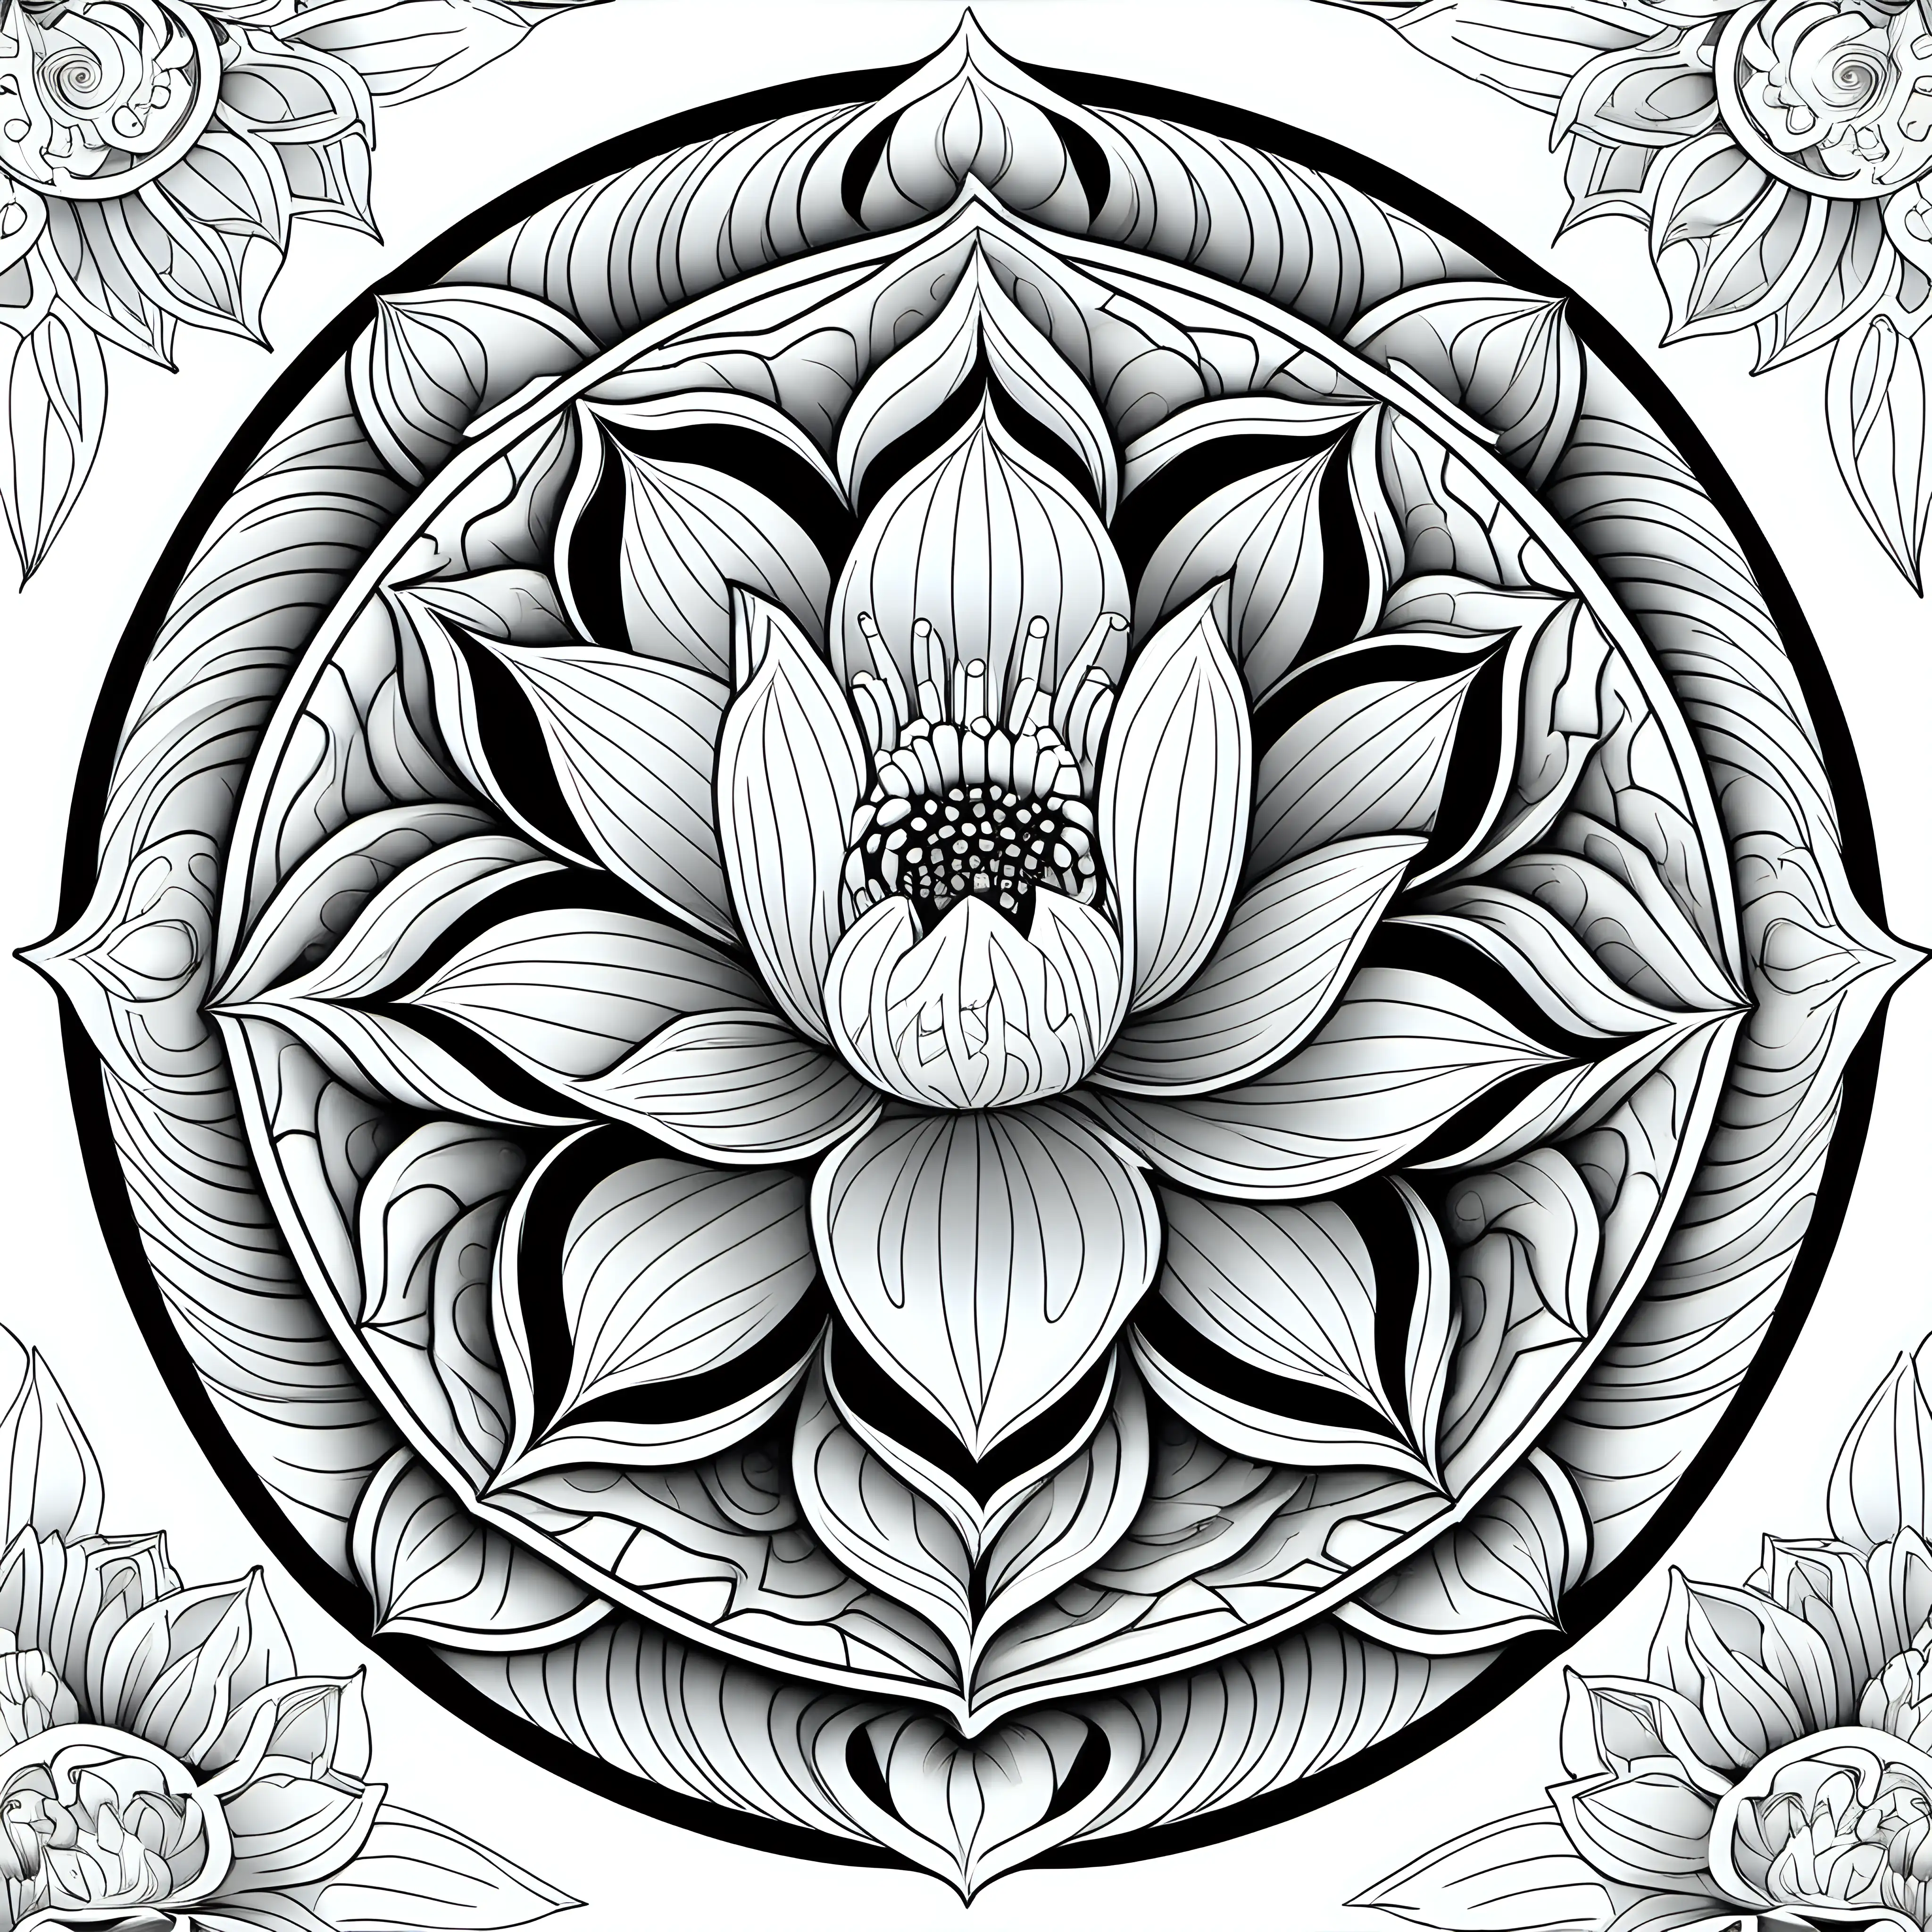 black and white coloring page with white background, whole lotus flower from stem, to leaves, to petals, the mandala artistry is drawn inside theloyus flower's leaves and petals, very intricate mandala designs within the petals and leaves that has enough space for someone to color inside of the design, only black and white image, add celestial moon and stars feeling